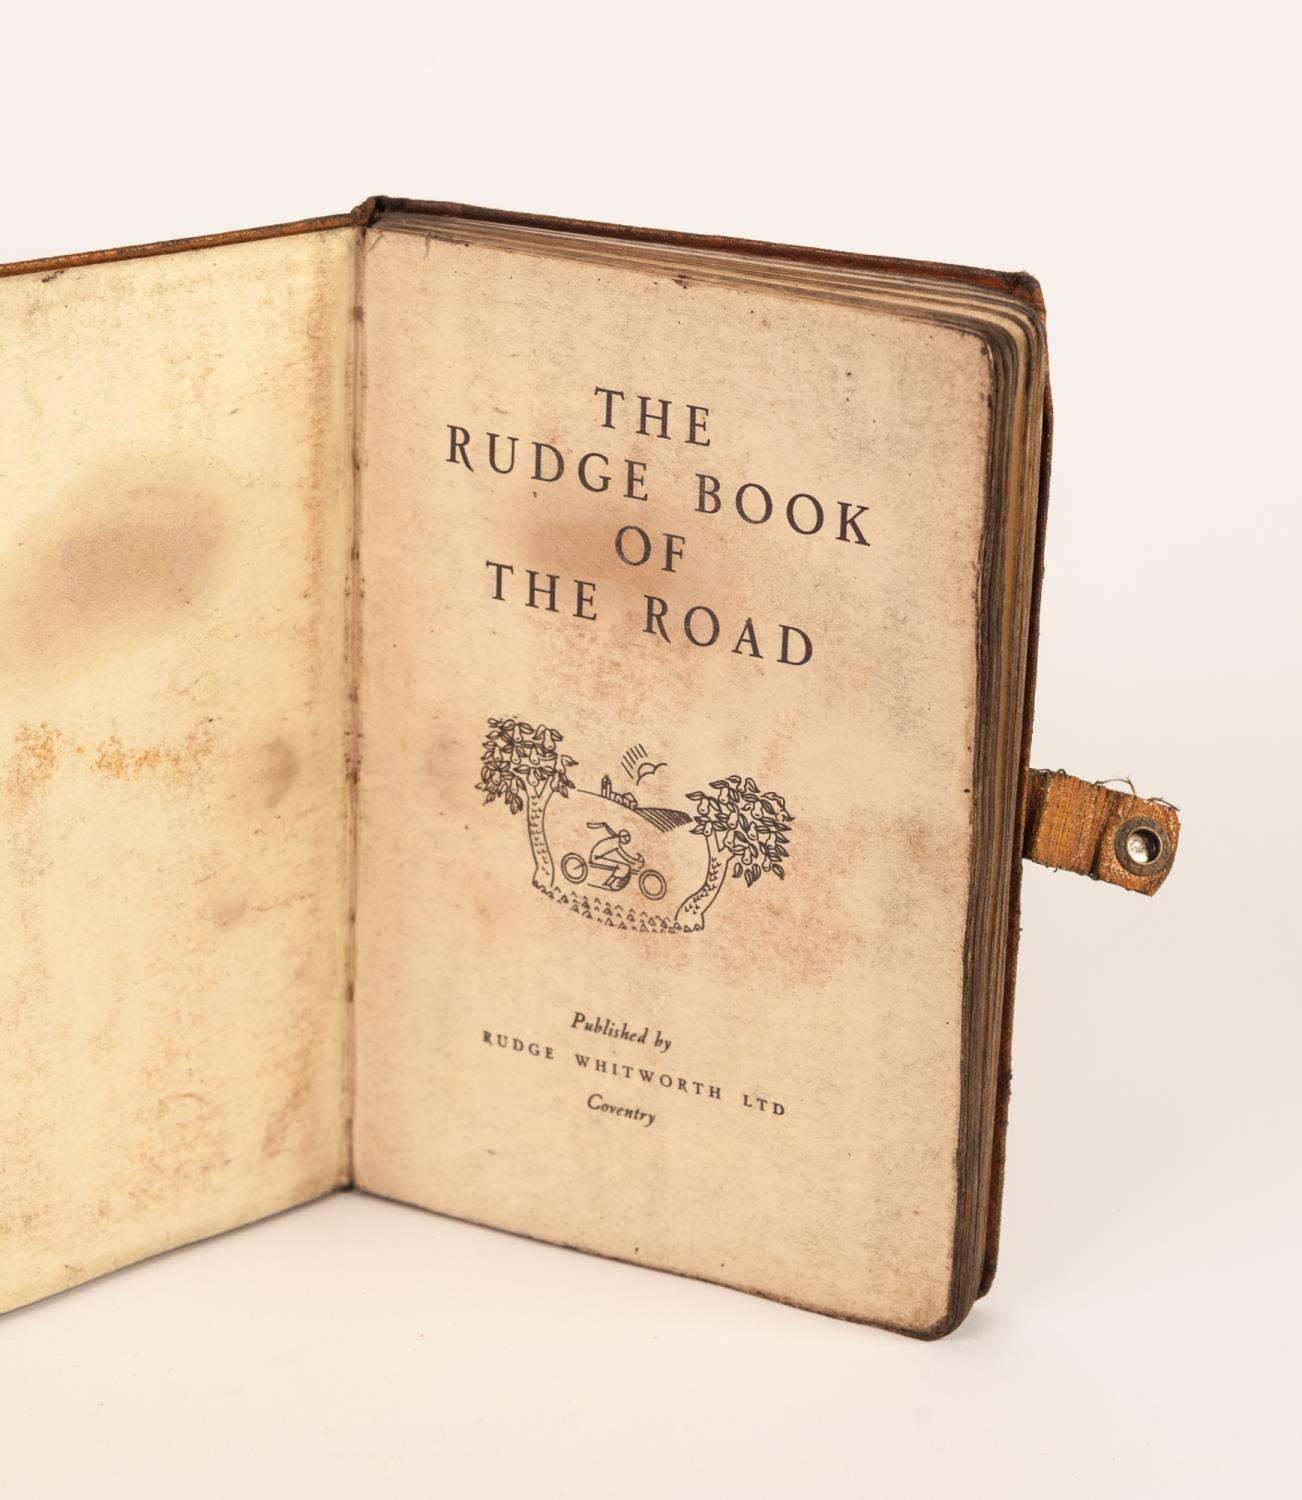 THE RUDGE BOOK OF THE ROAD, circa 1927, a pocket guide for Rudge motorcycle owners, published by - Image 2 of 2